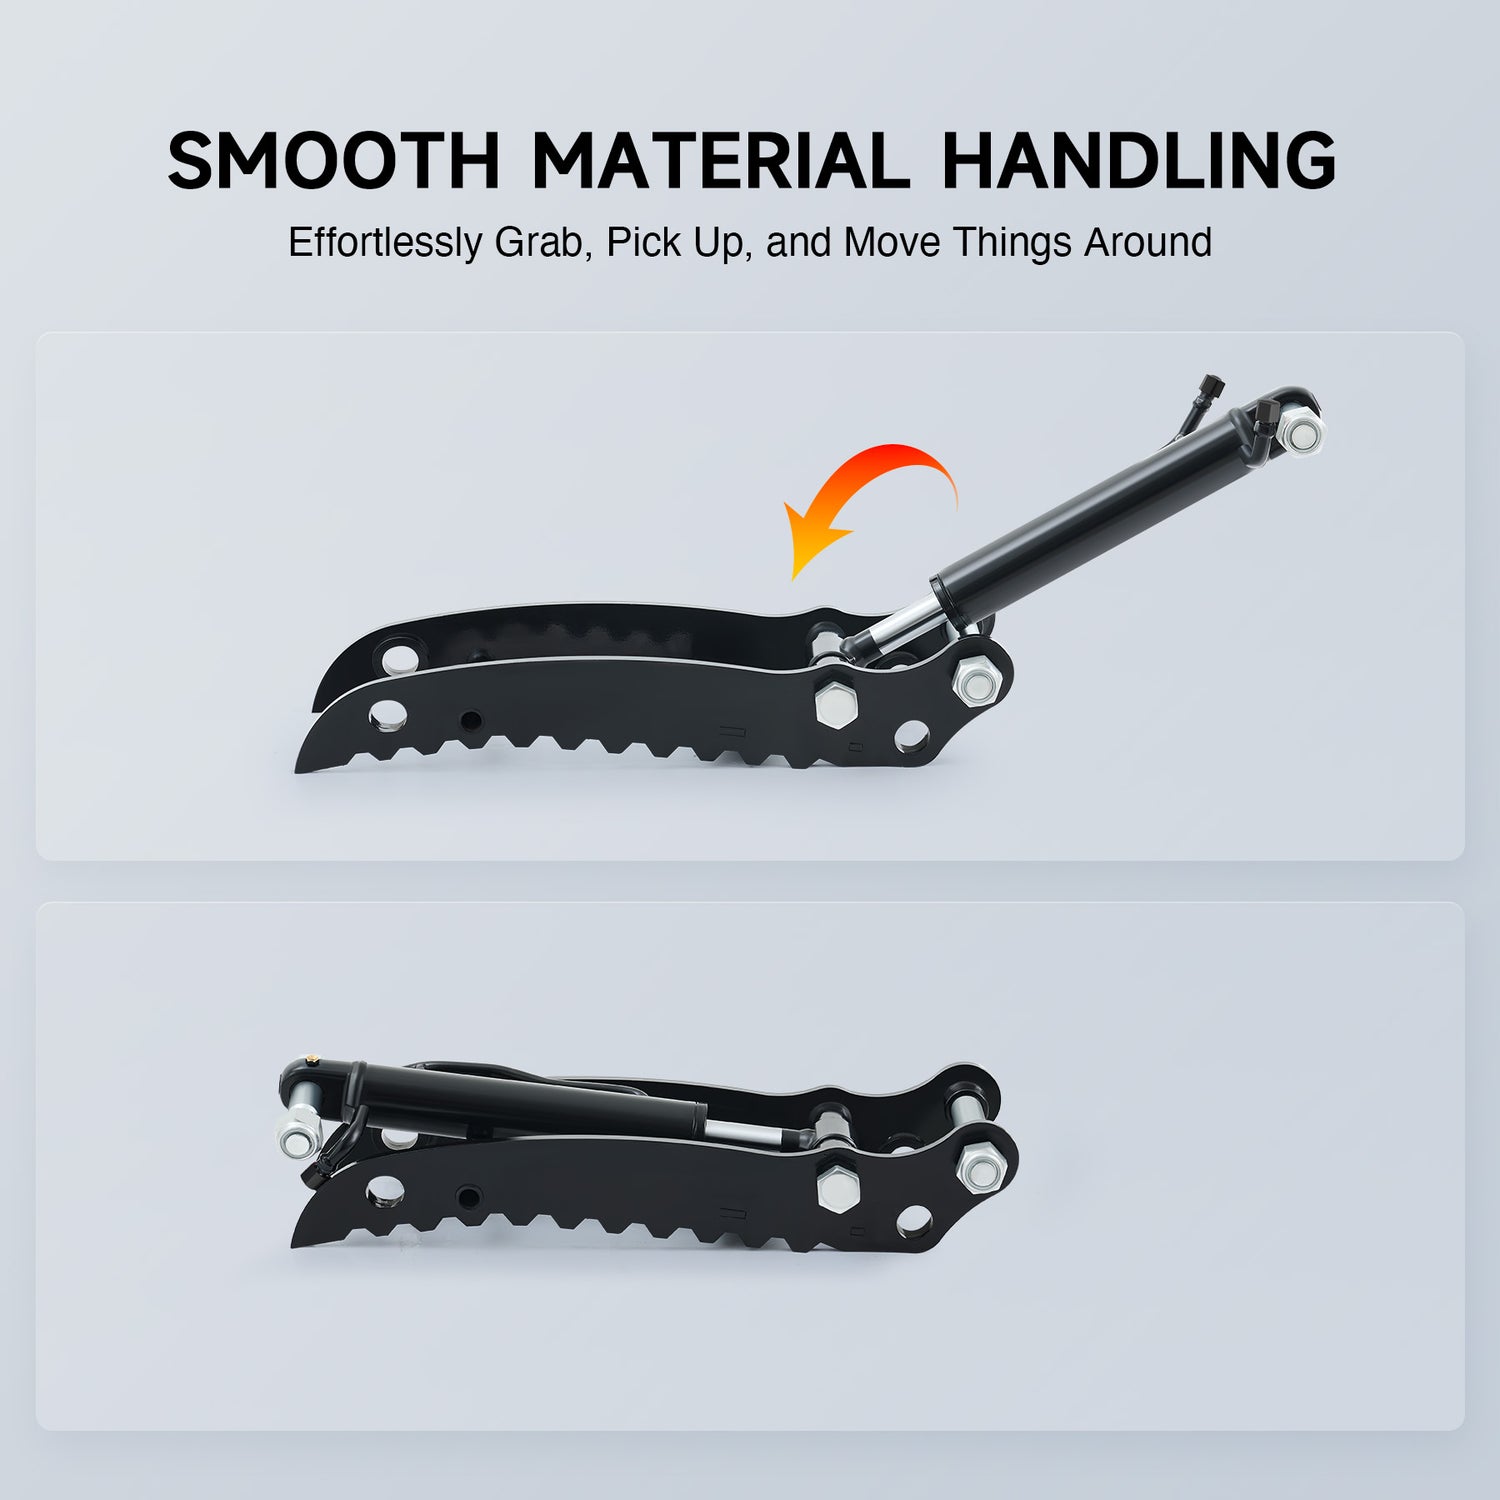 Smooth Material Handling